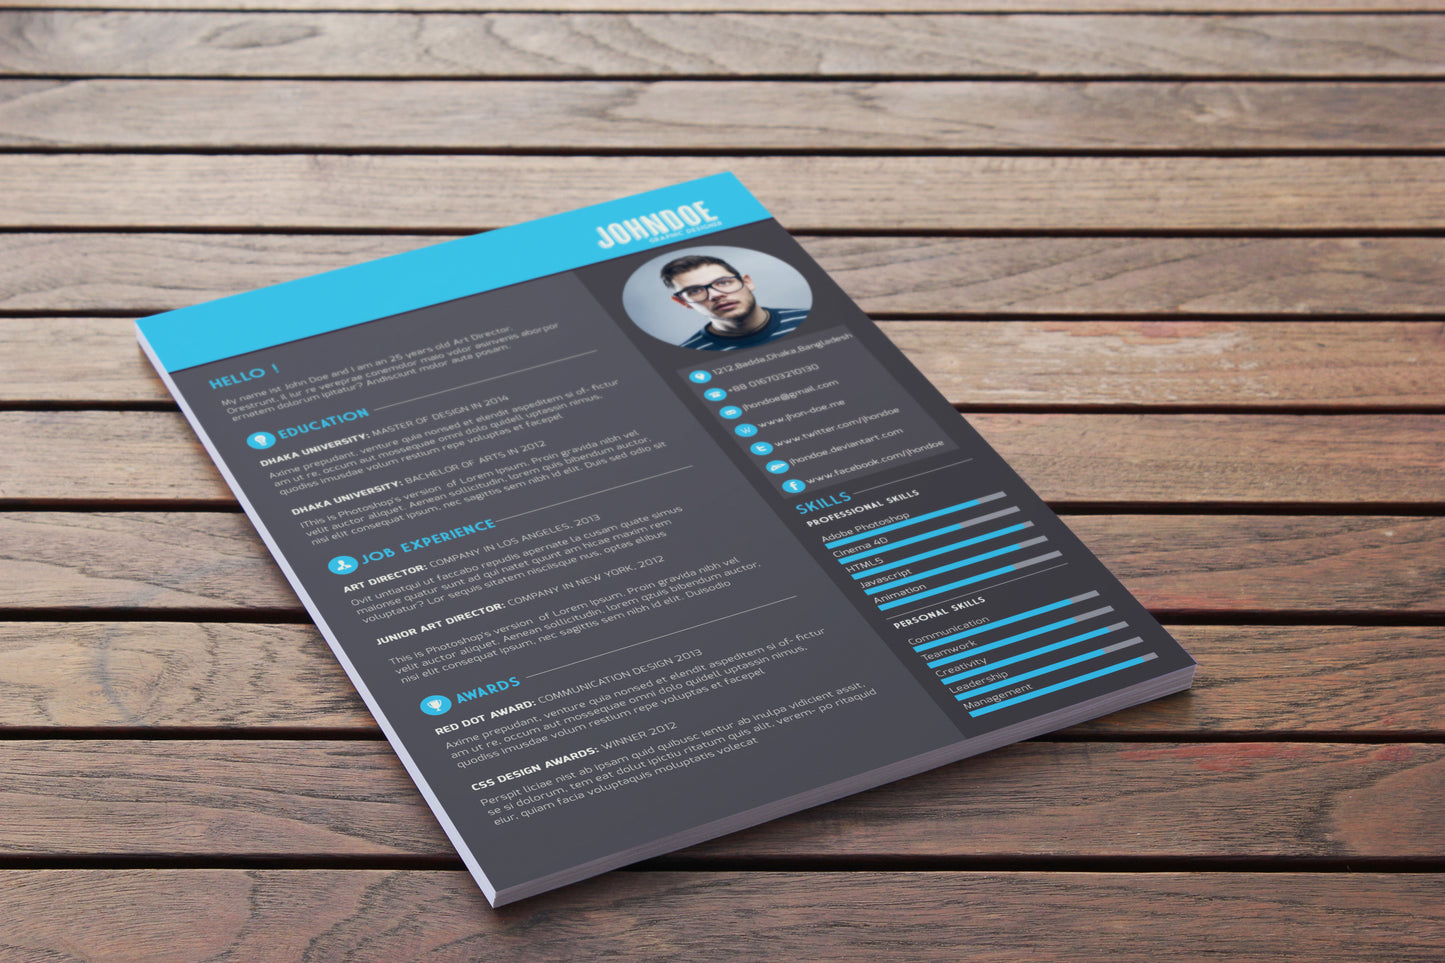 Free Resume Template Download